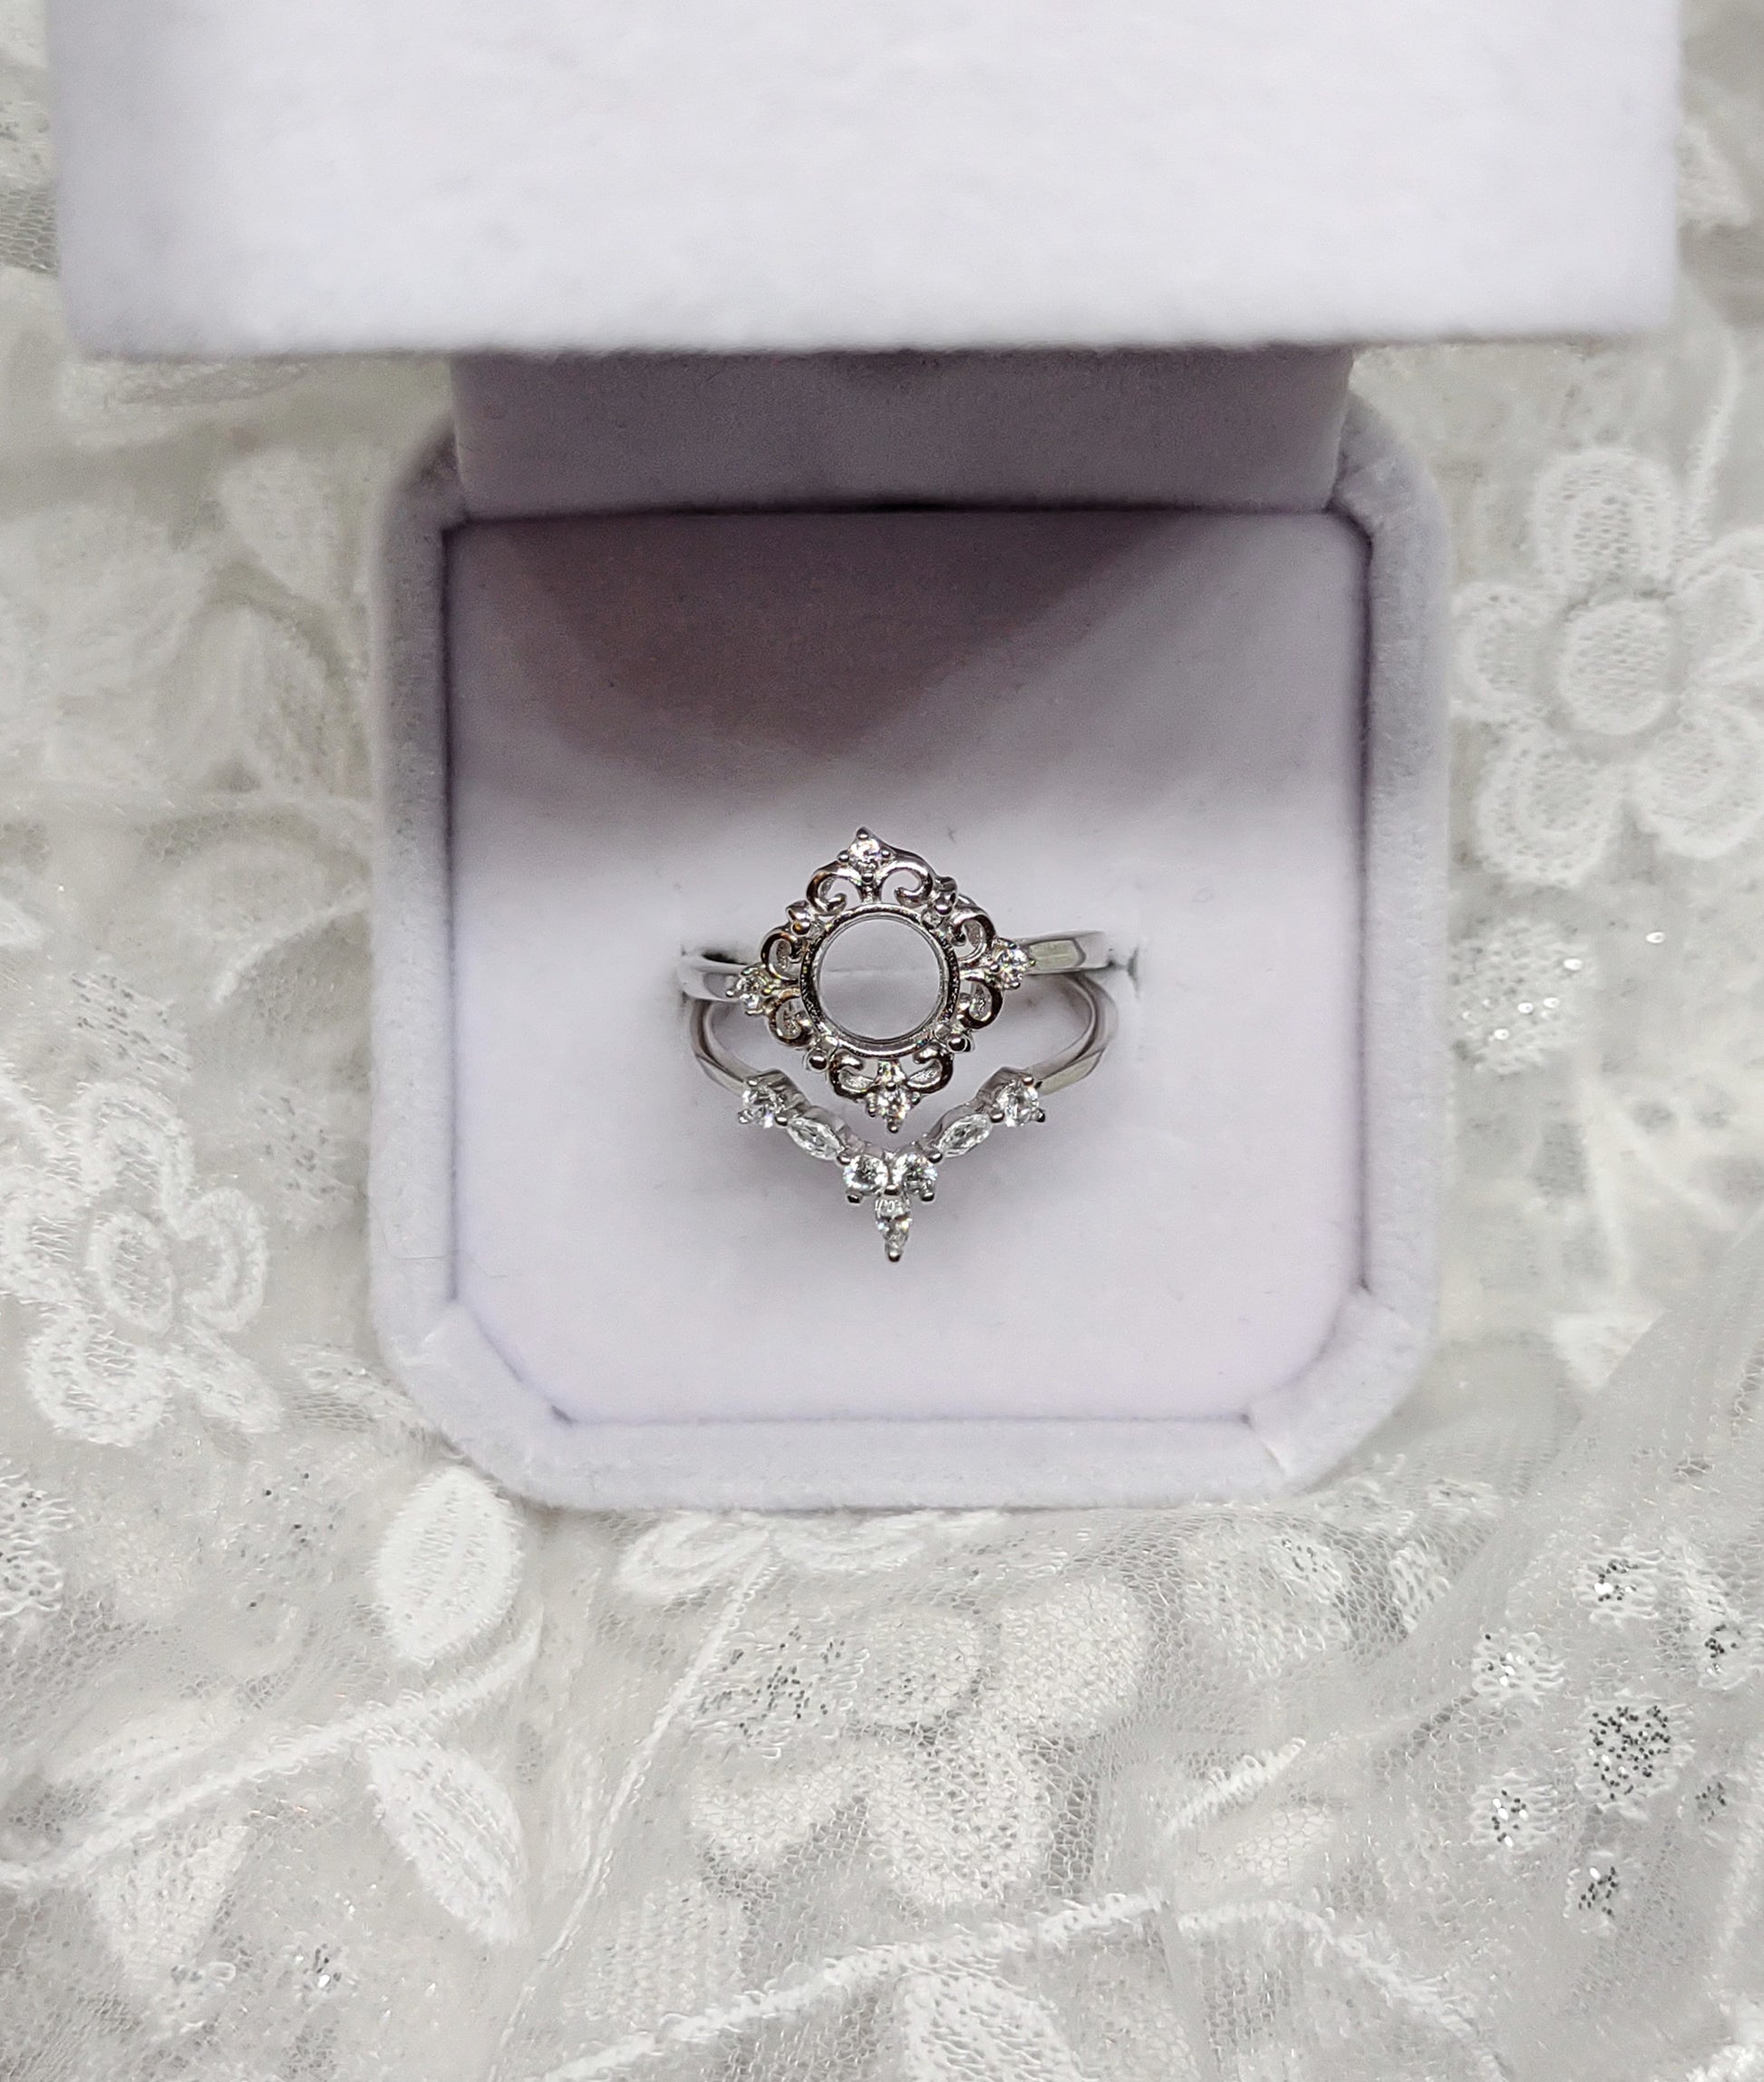 A silver halo semi mount with a diamond shape and 4 small clear gems on the top, bottom and on each side.